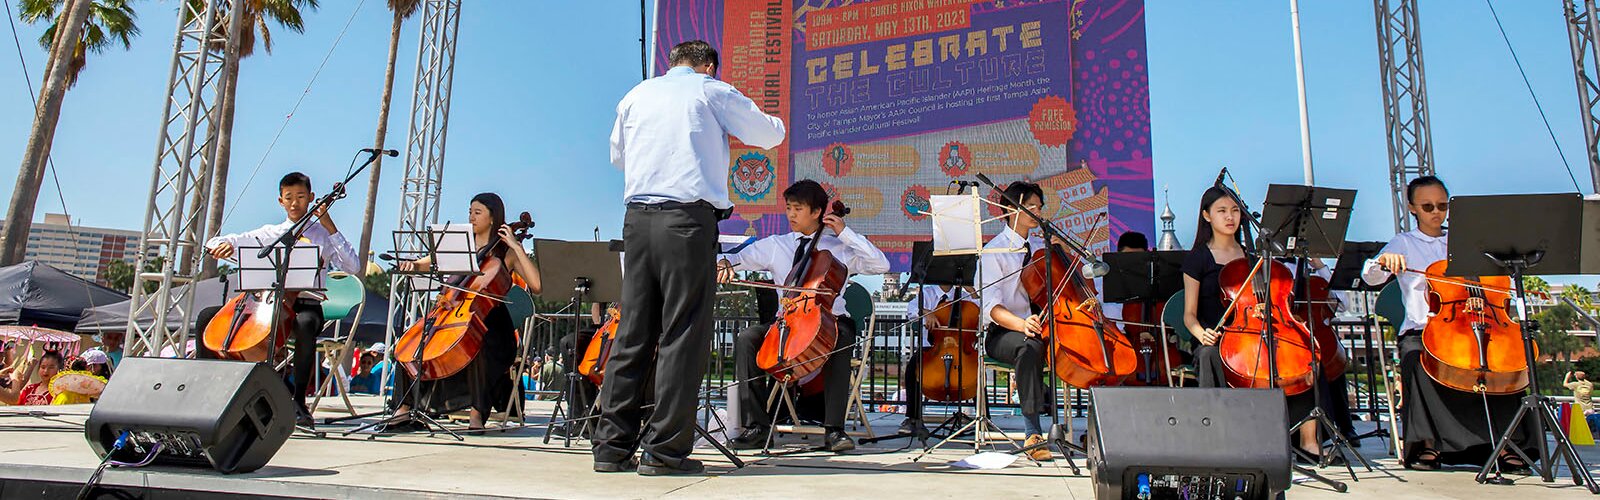 Students from Tampa's AllMay Music Studio perform "America the Beautiful" during the City of Tampa's Asian Pacific Islander Cultural Festival at Curtis Hixon Waterfront Park.